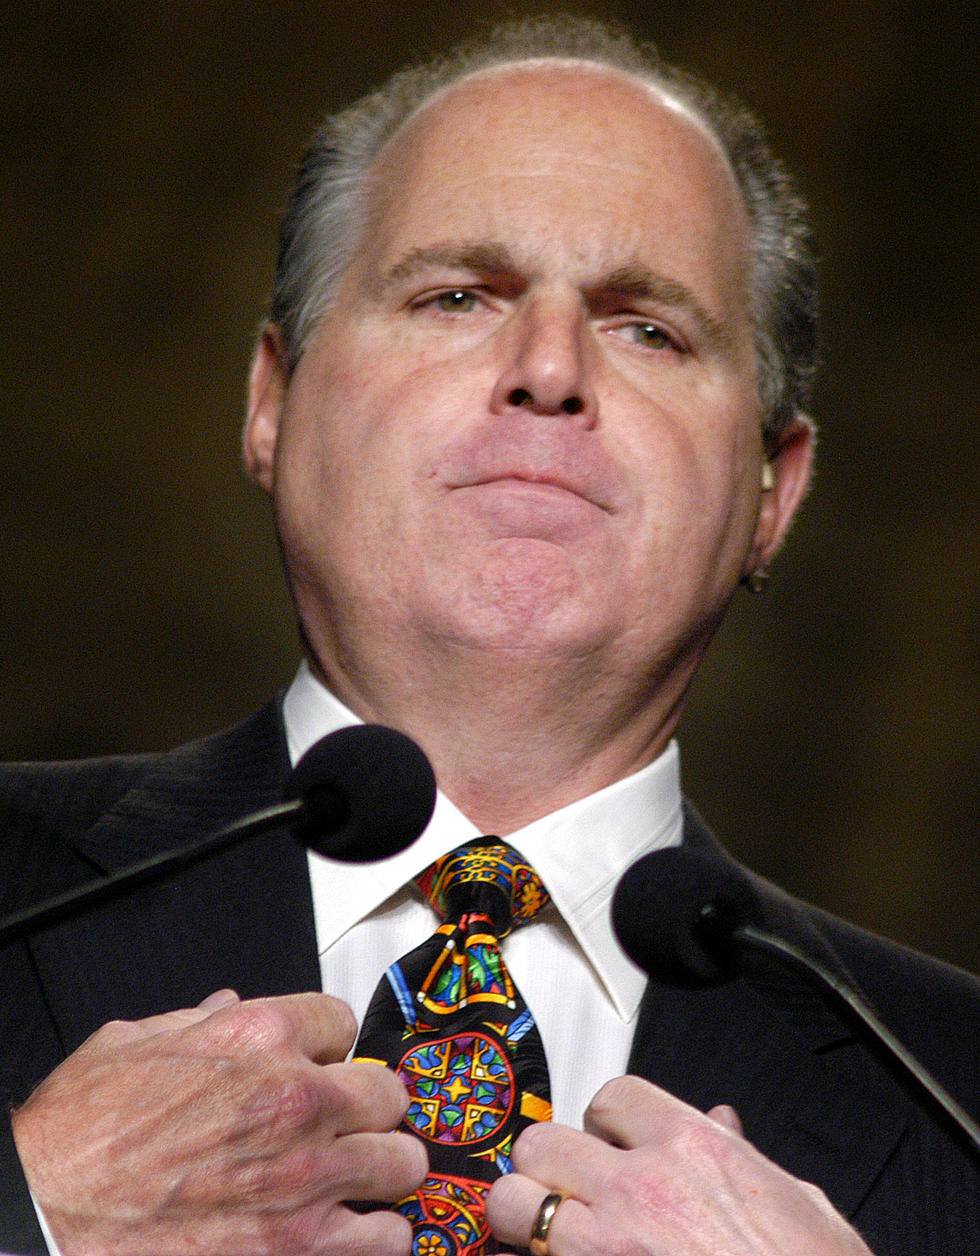 Rush Limbaugh Laments That He Is Ashamed of the Country